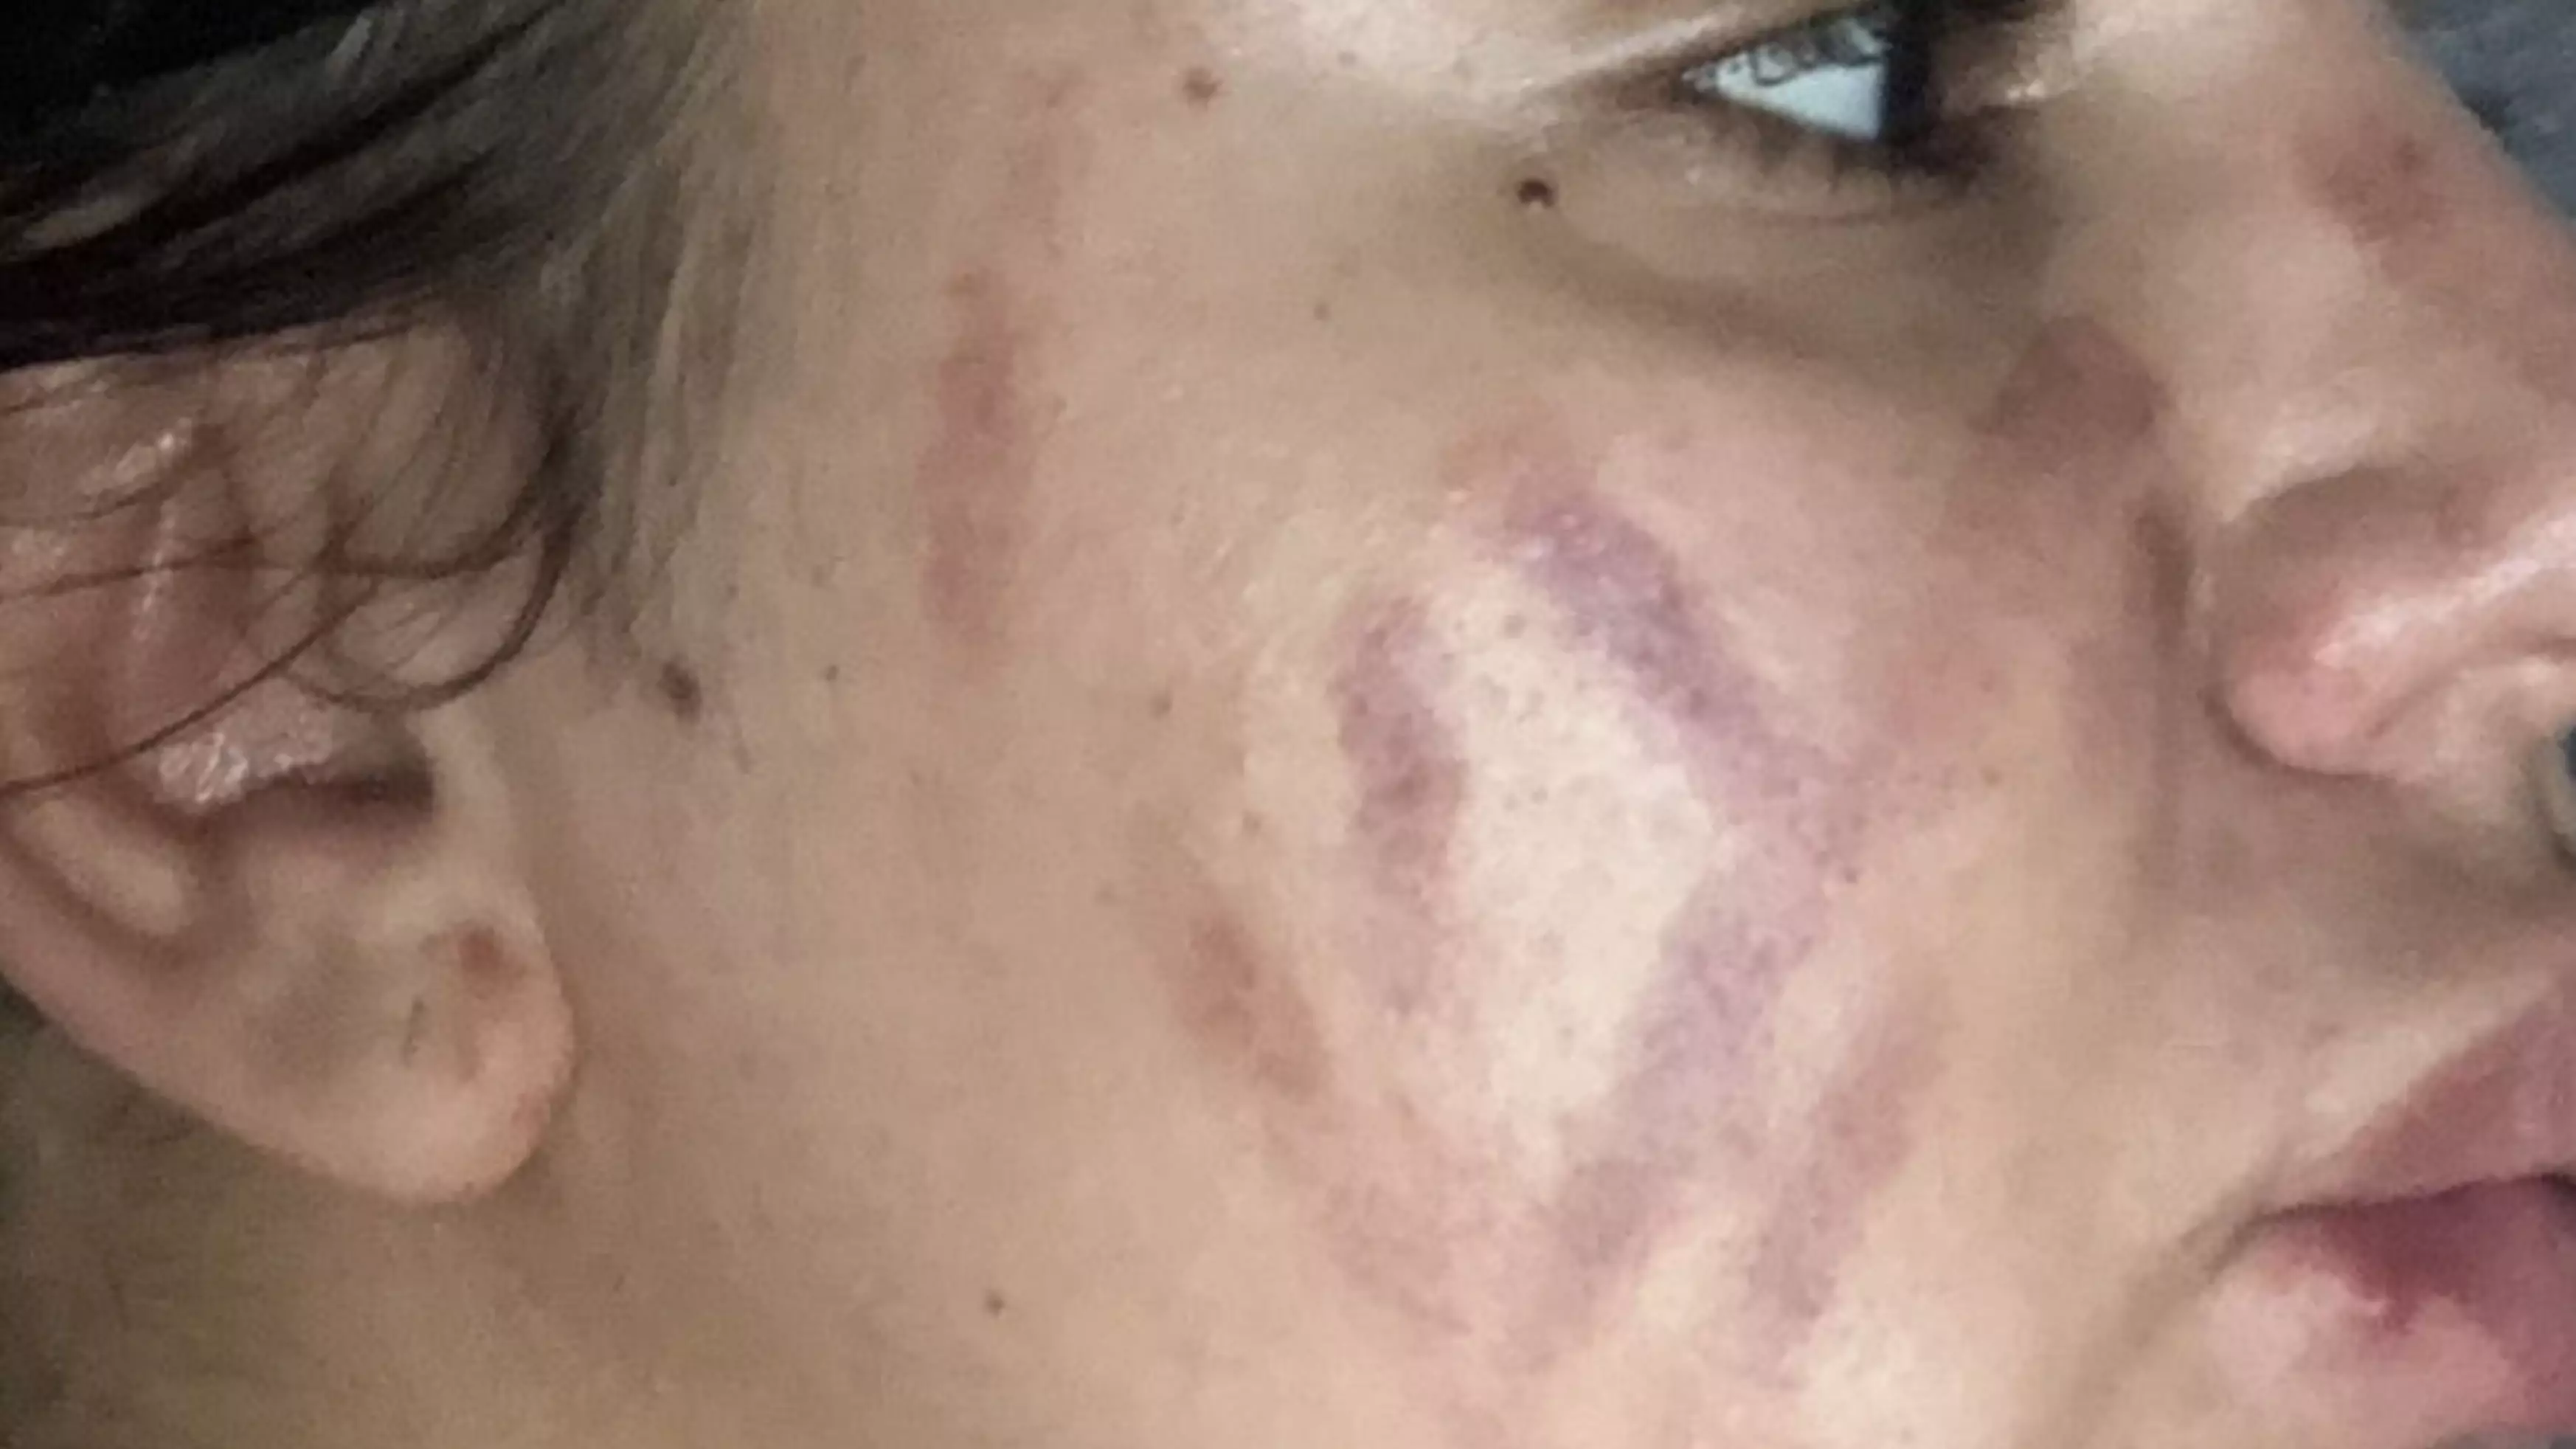 Student Left With Severe Bruises After Using Blackhead Remover